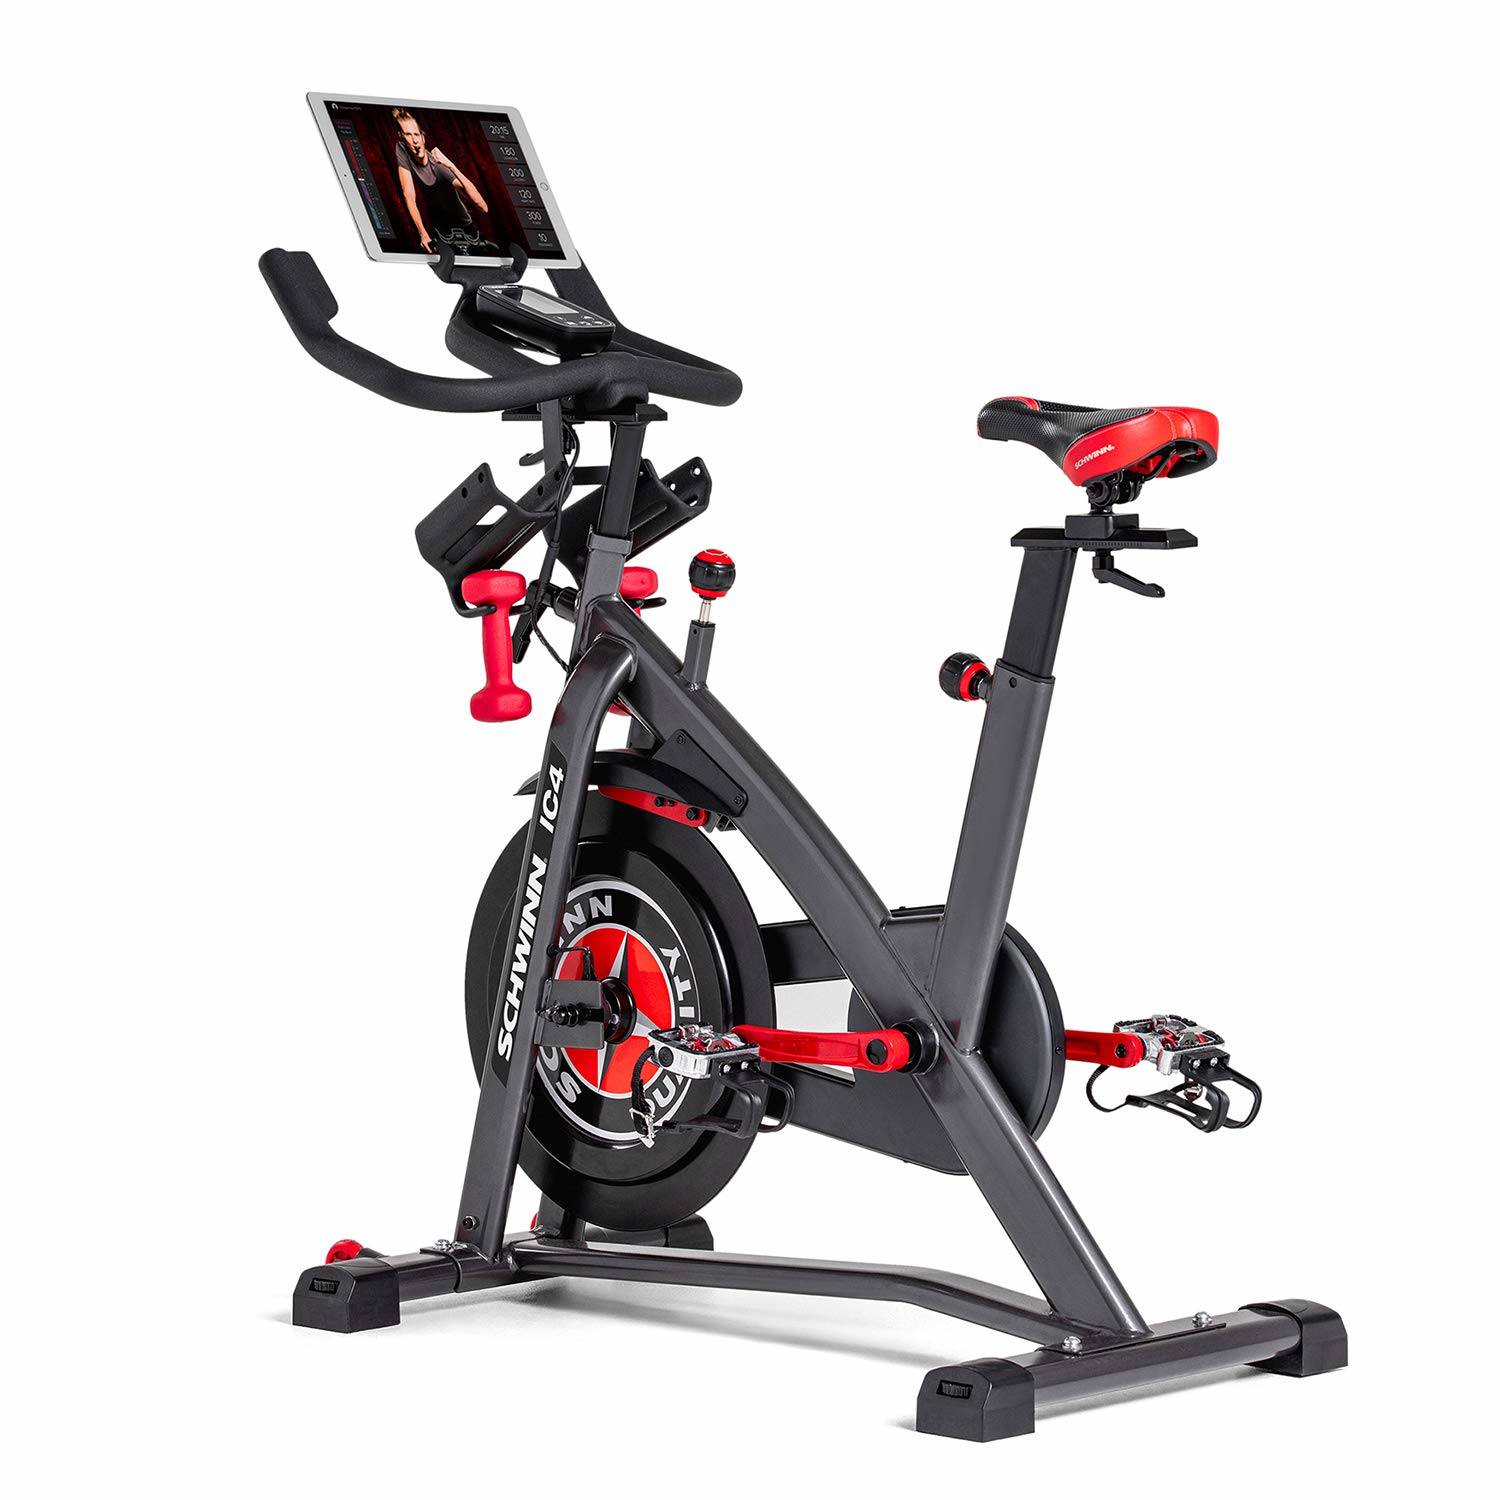 Schwinn Ic4 Indoor Cycling Bike Review Pros Cons